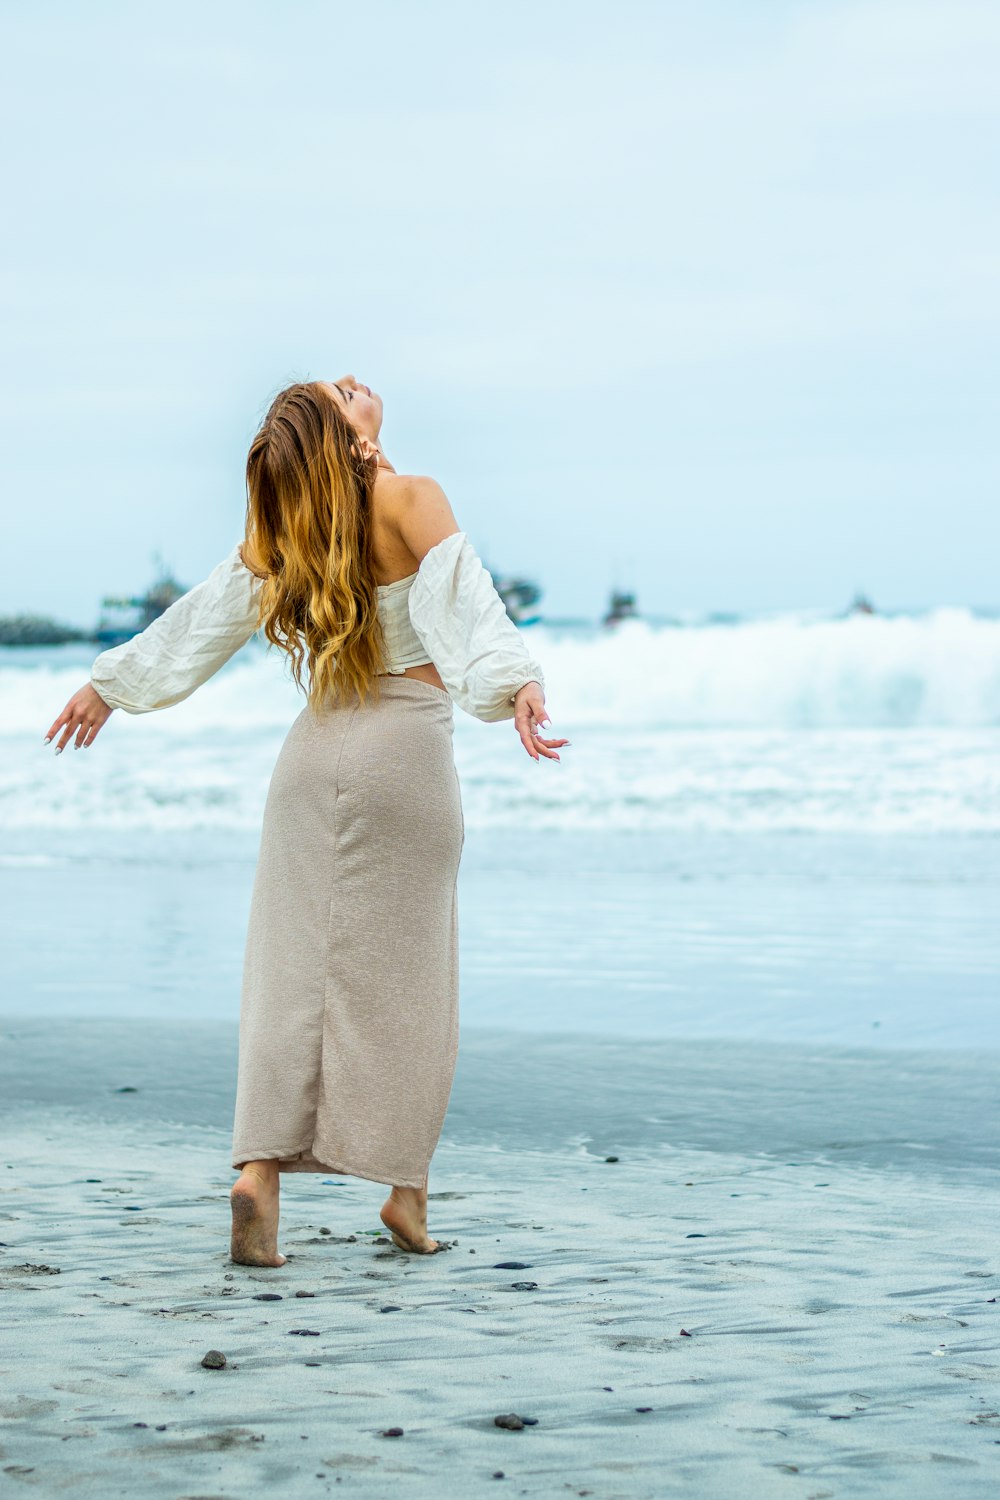 woman in white long sleeve dress standing on beach during daytime